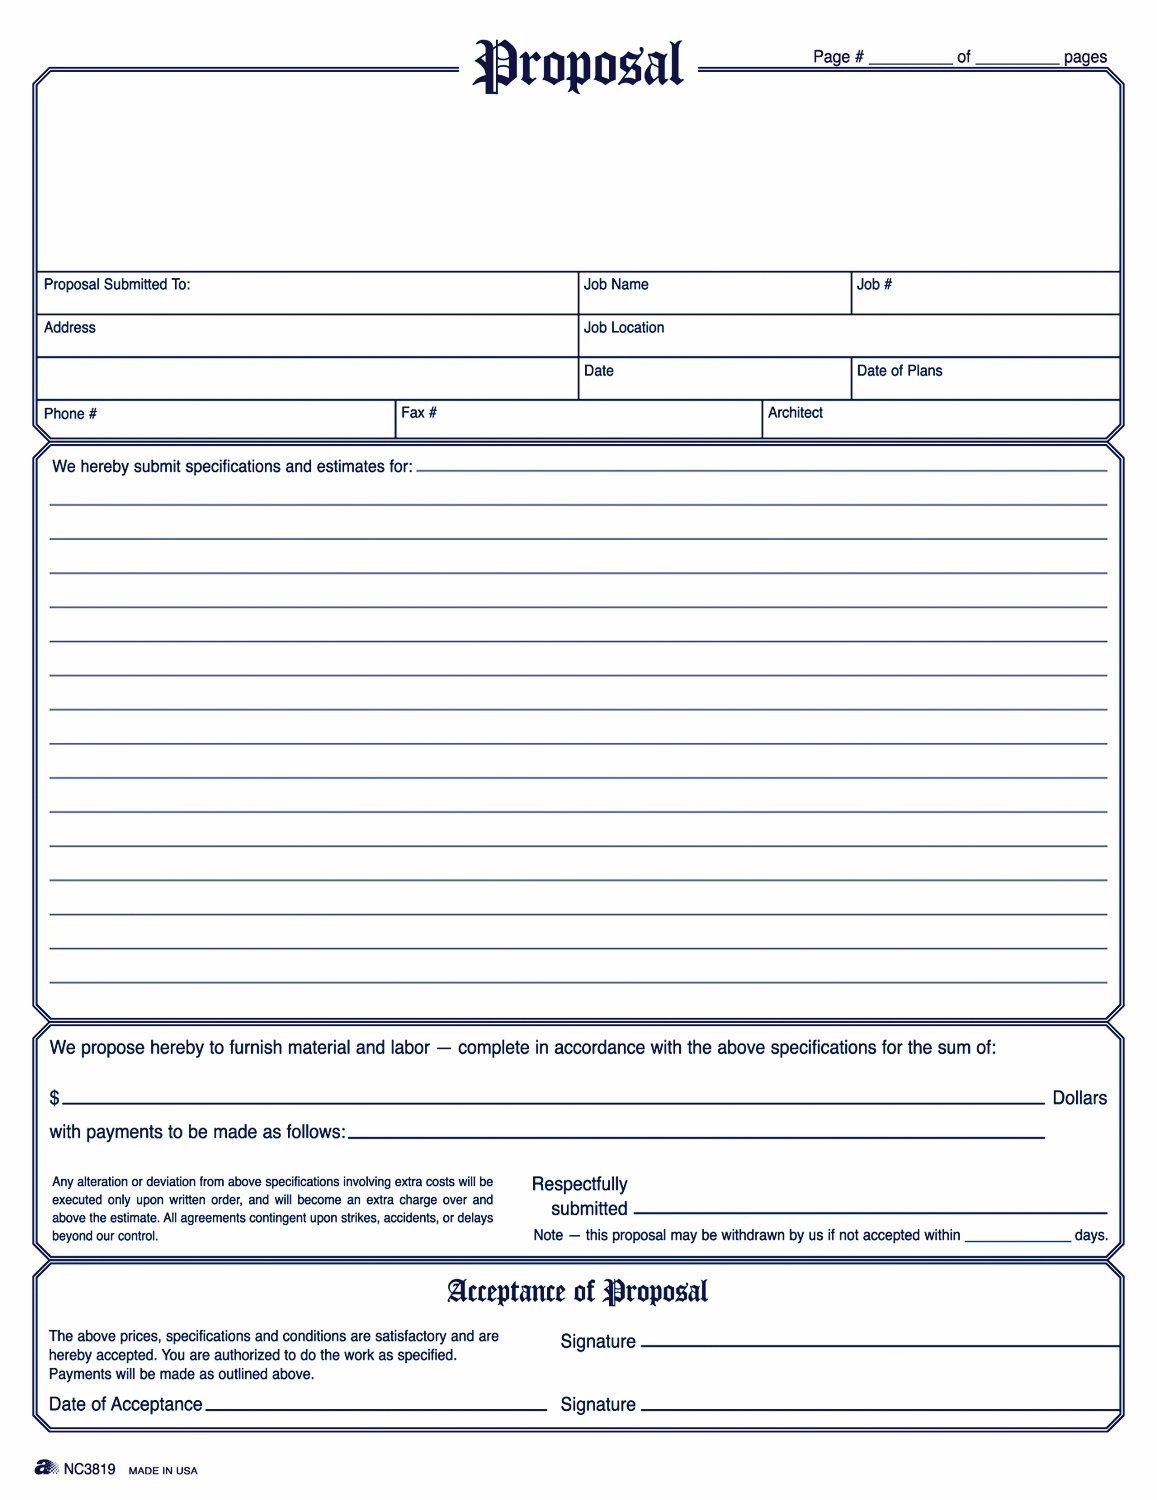 Image Result For General Contractor Forms Templates | Job Proprosals - Free Printable Contractor Proposal Forms